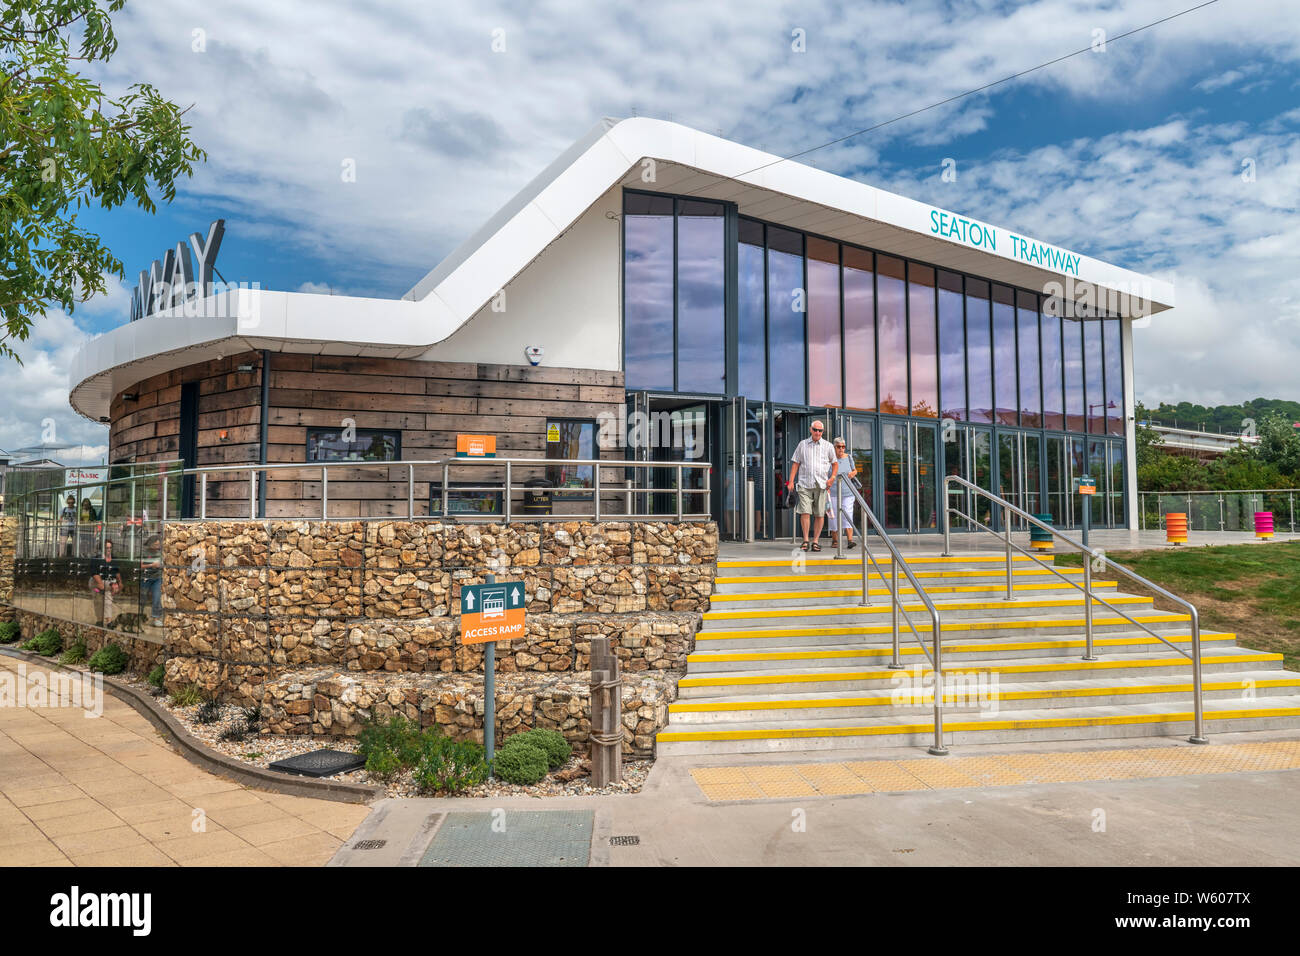 Situated in the South East Devon seaside town of Seaton, the new building for Seaton Tramway, opened in 2018, offers a small gift shop, a cafe and inf Stock Photo